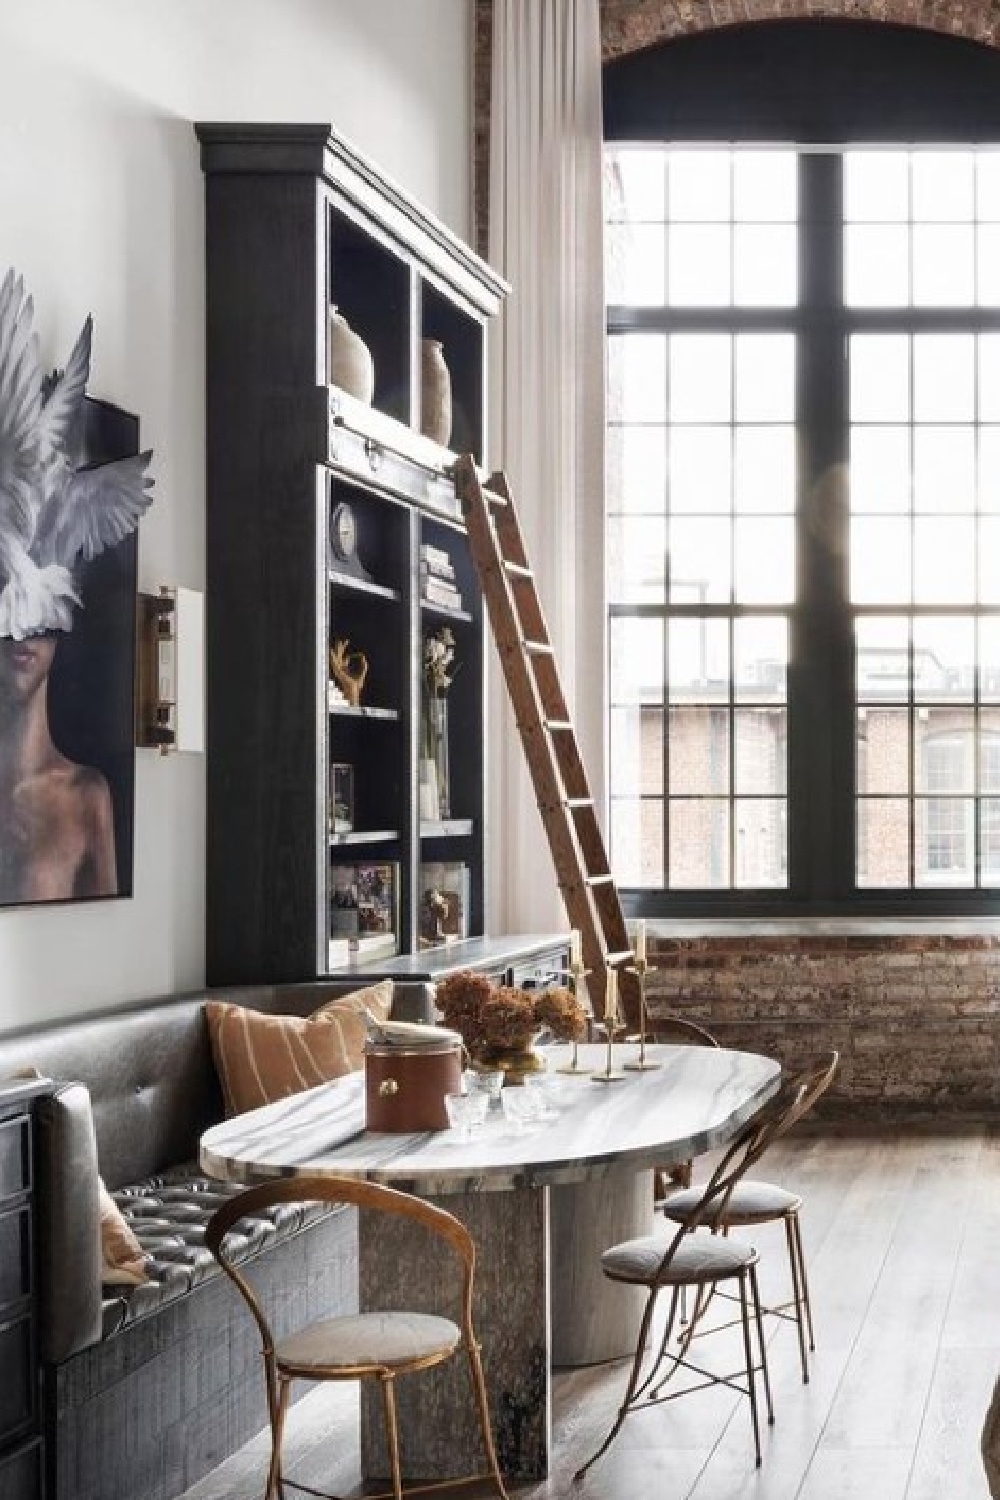 Banquette, built-ins and ladder in beautiful Alison Victoria designed Atlanta loft on HTV's Windy City Rehab. Photo: Rustic White Interiors; Styling: Courtney Favini. House Beautiful.